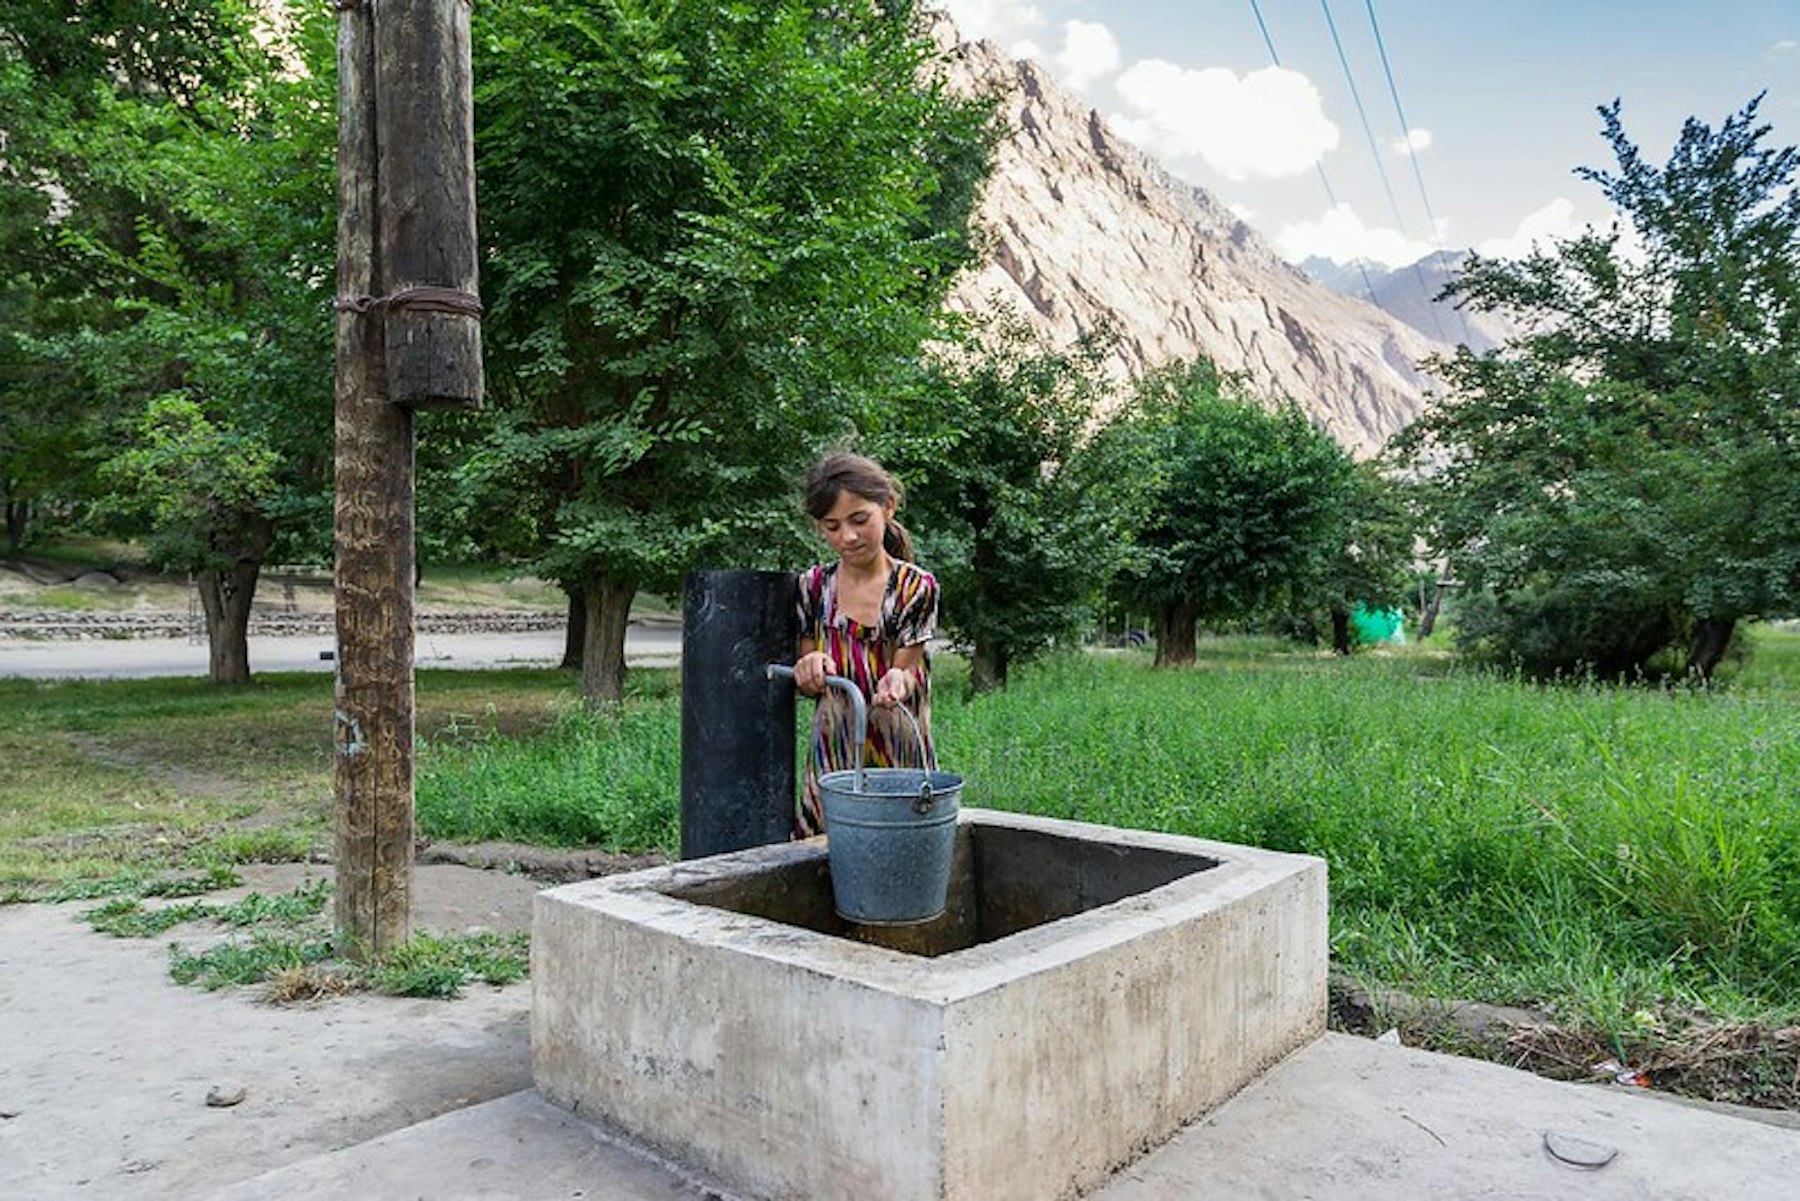 Access to water is a major obstacle for remote mountain communities in Tajikistan. Connecting and constructing water pumps is essential for improving living standards.